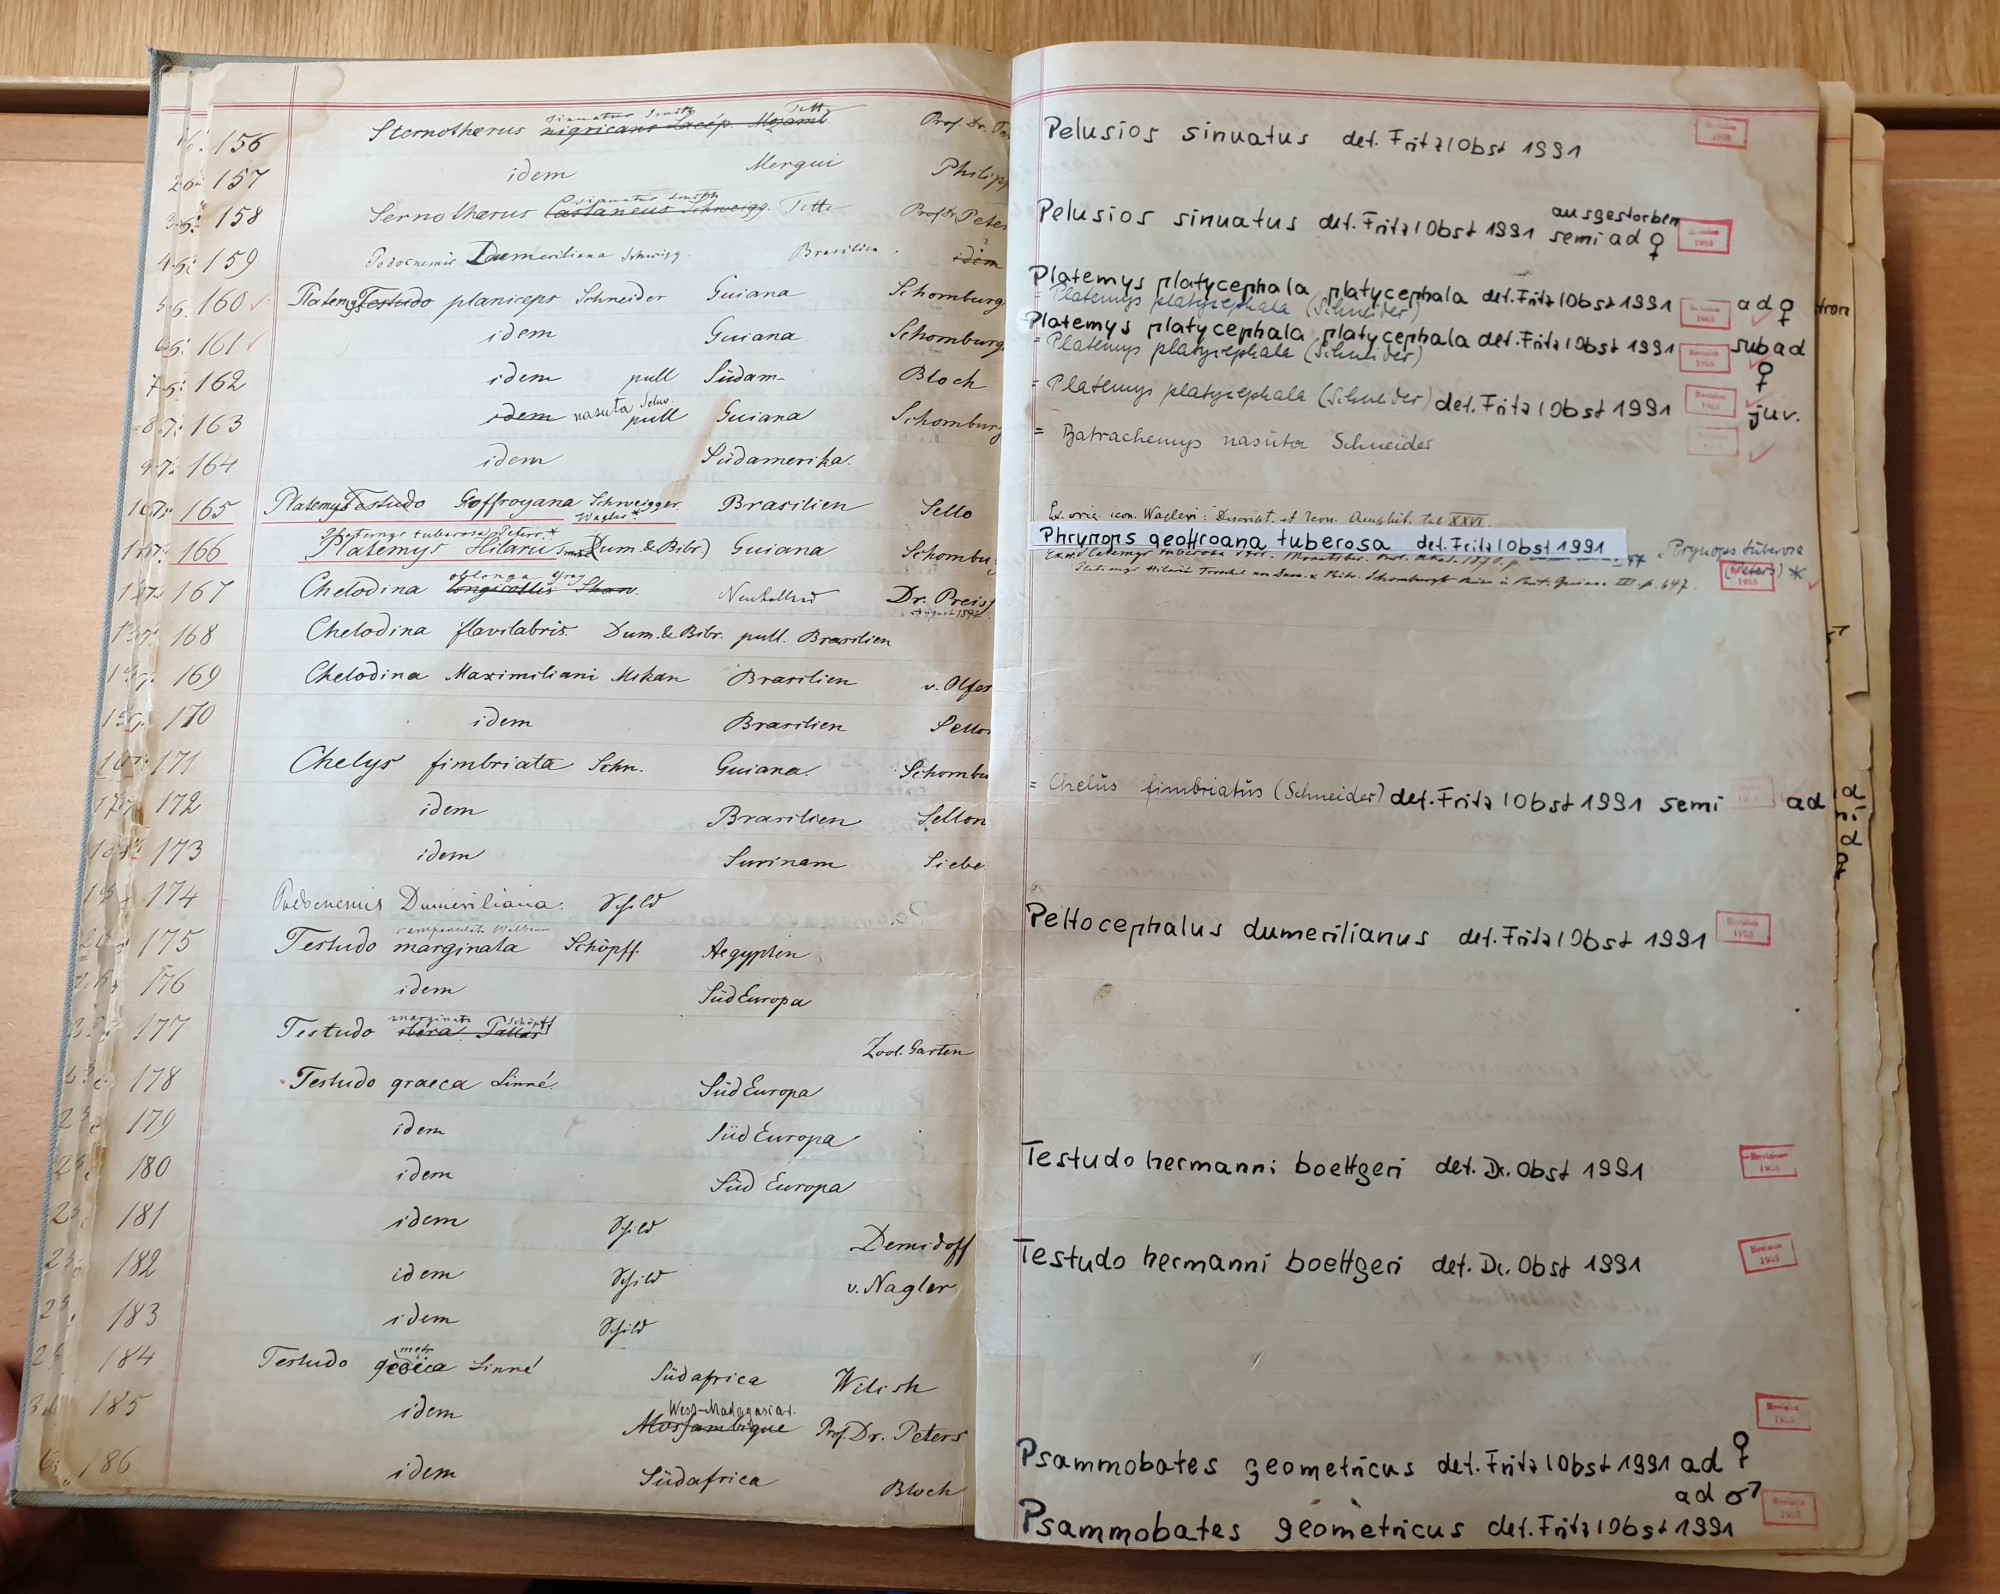 Open double page of a catalogue with handwriting and various preprinted columns and rows. On the left-hand page, consecutive numbers have been entered in the left column and, to the right of them, their Latin animal names, as well as place names and people's names. On the right-hand page, various handwritten comments have been entered on some rows and, in others, Latin animal names, years, and red stamps with the word "revision".